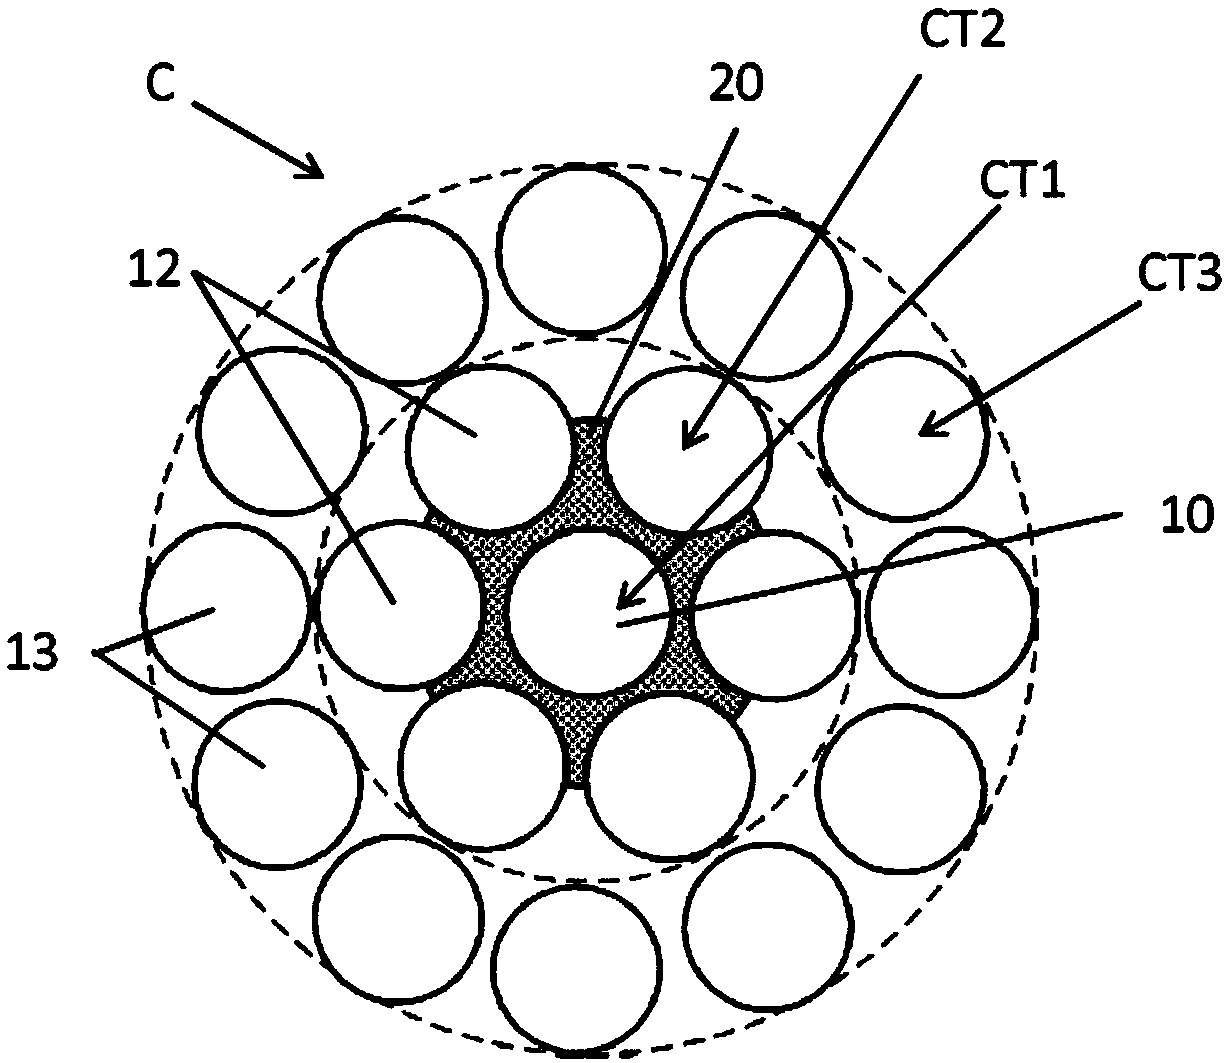 Cable treated with in-situ rubberization and comprising a sizing composition containing a corrosion inhibitor